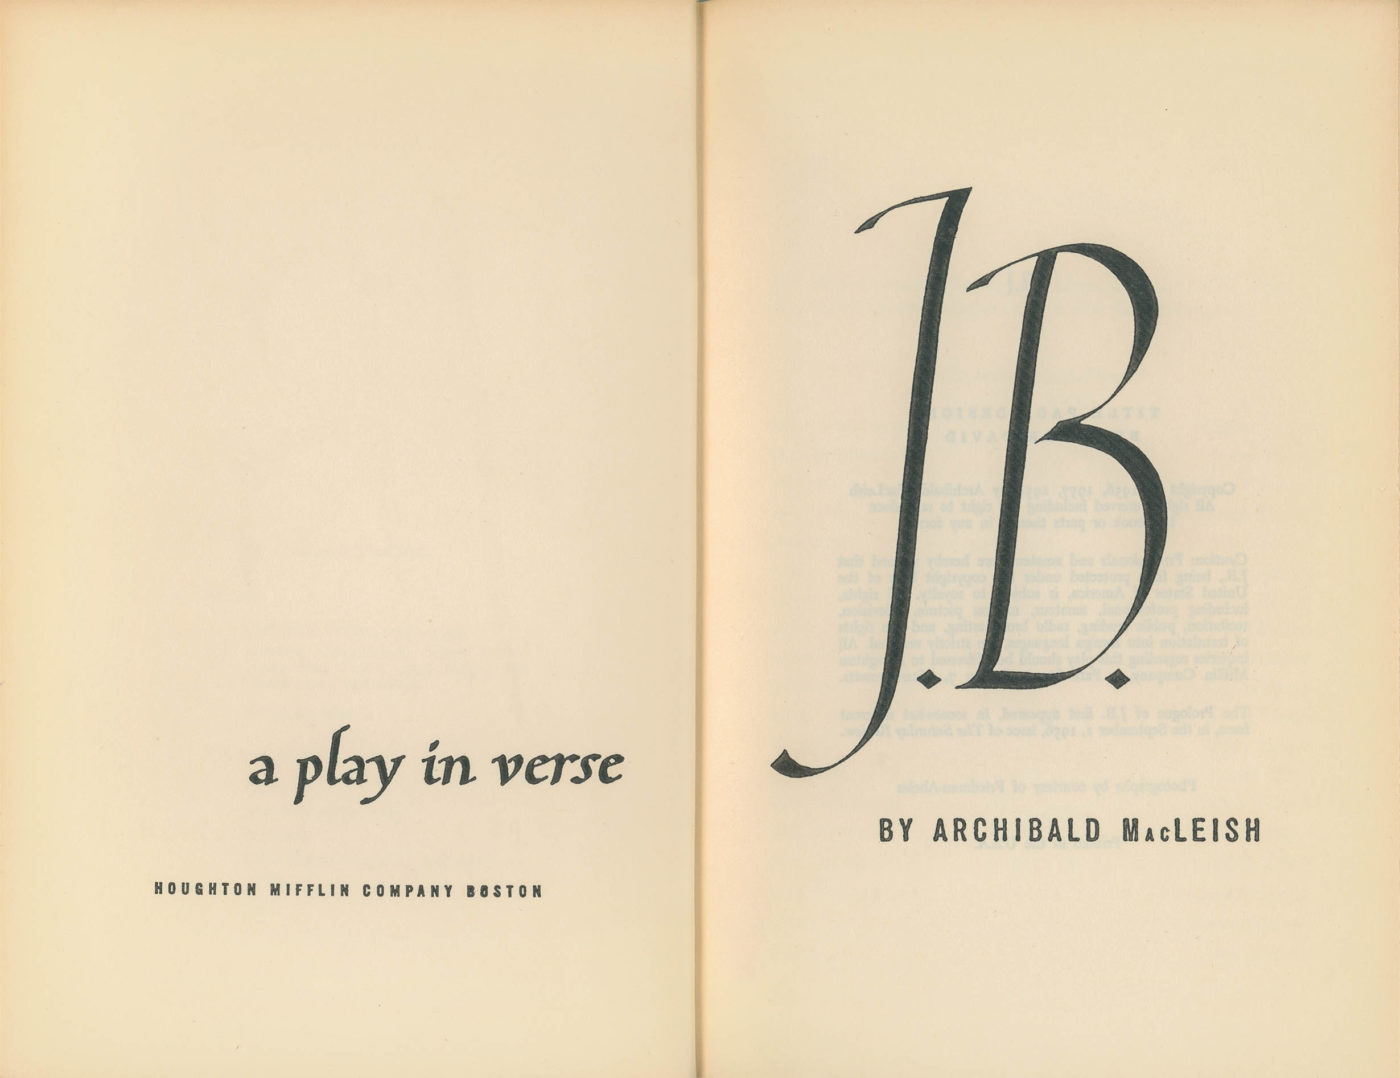 Title page for J.B. by Archibald MacLeish